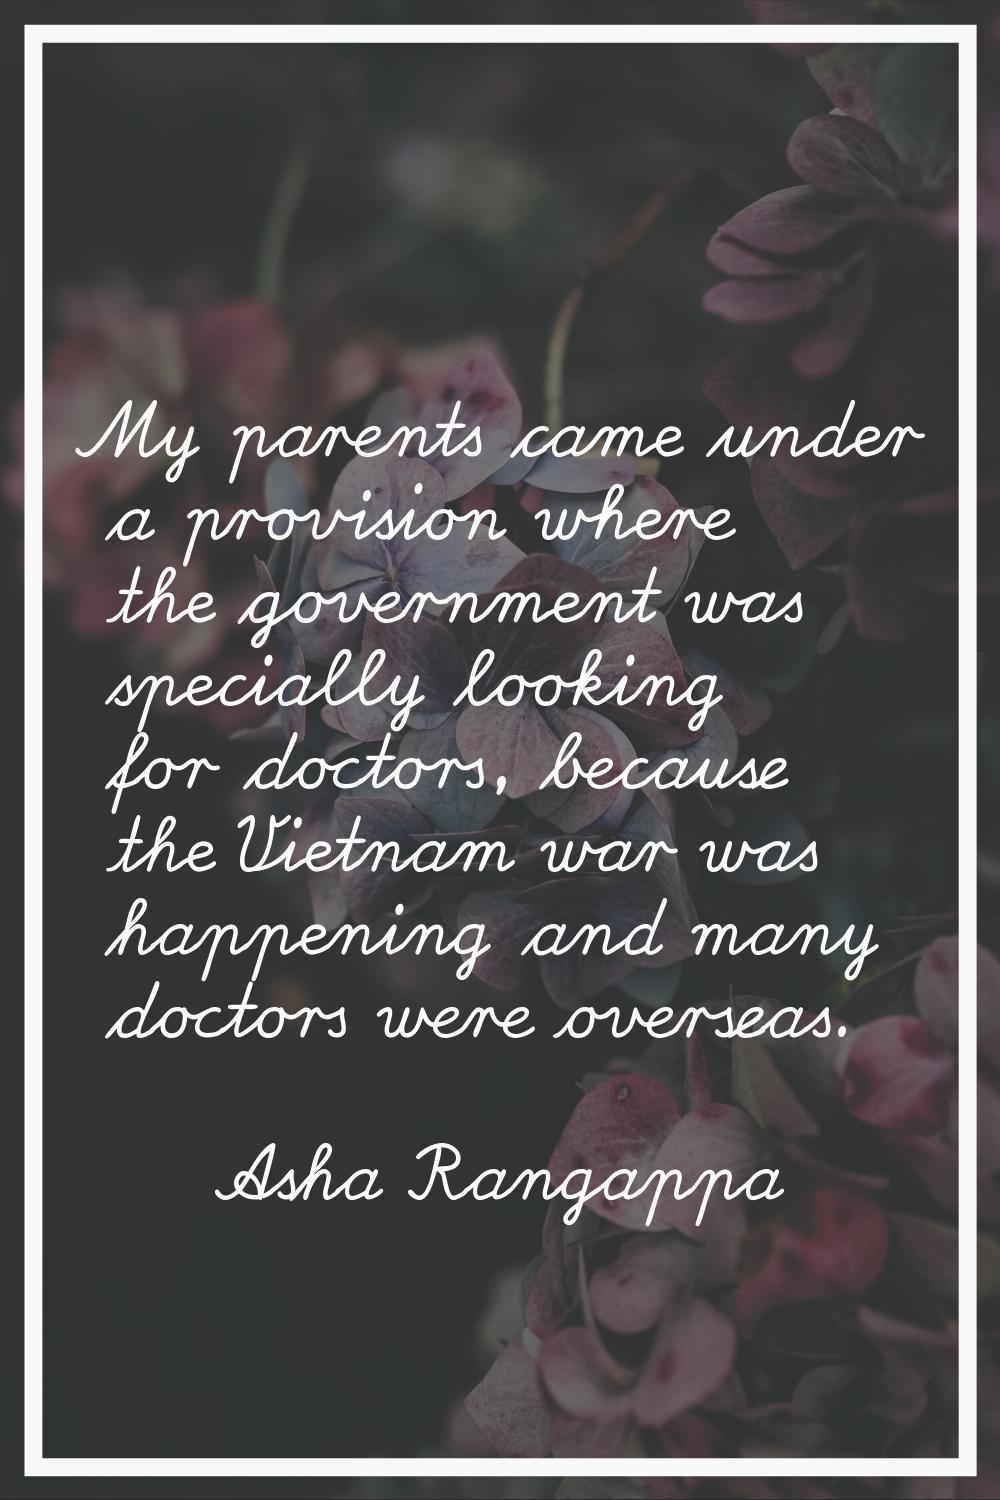 My parents came under a provision where the government was specially looking for doctors, because t